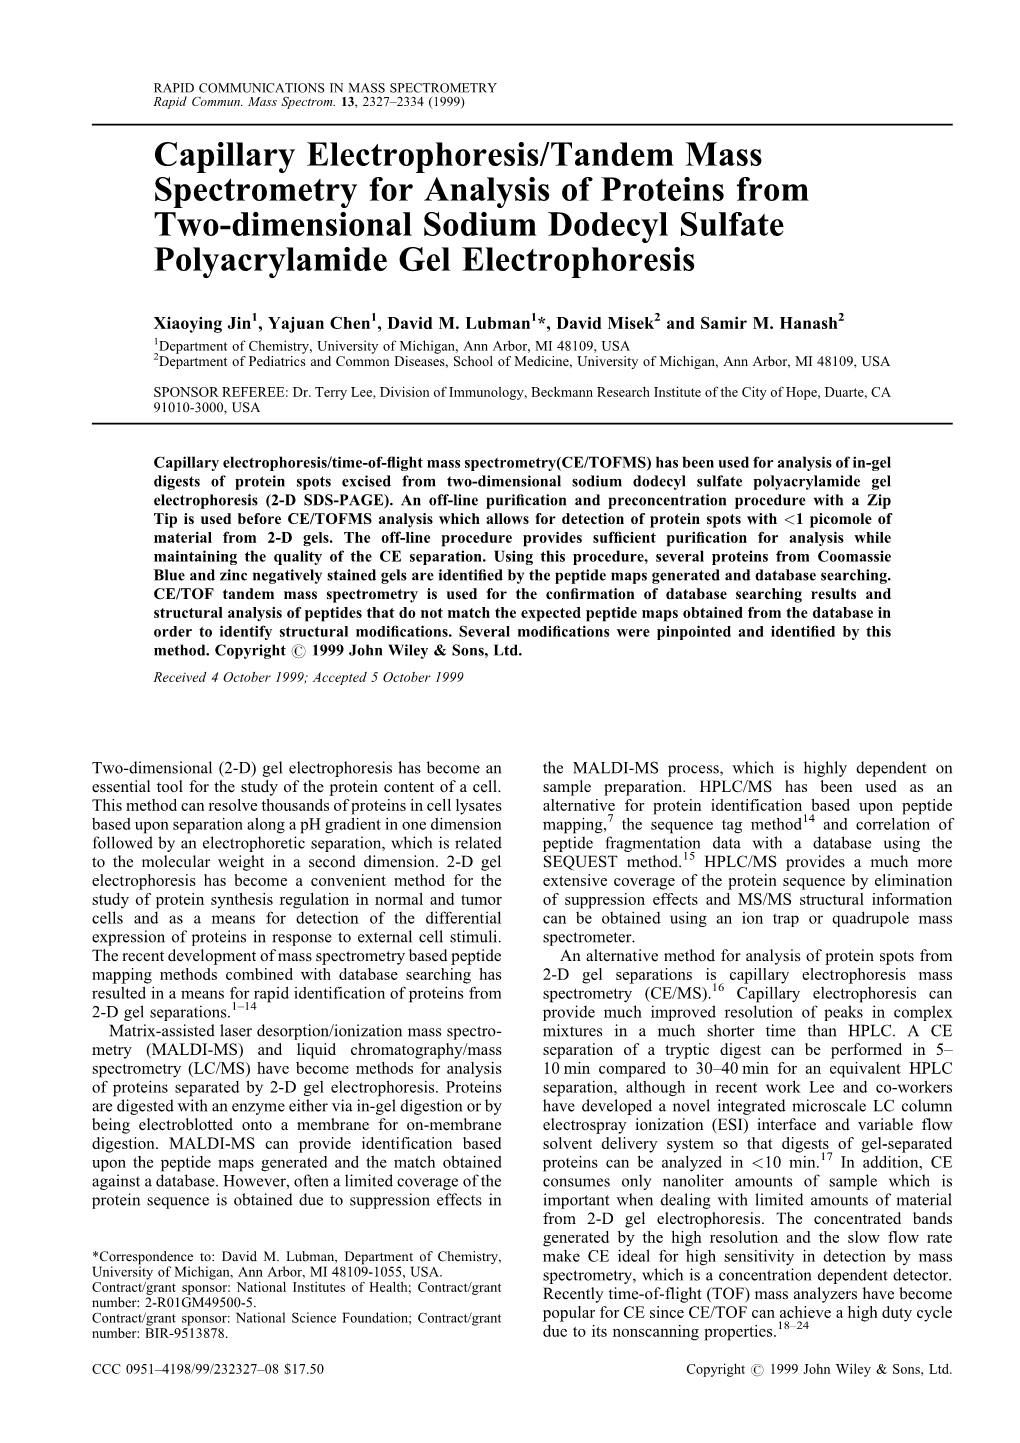 Capillary Electrophoresis/Tandem Mass Spectrometry for Analysis of Proteins from Two-Dimensional Sodium Dodecyl Sulfate Polyacrylamide Gel Electrophoresis